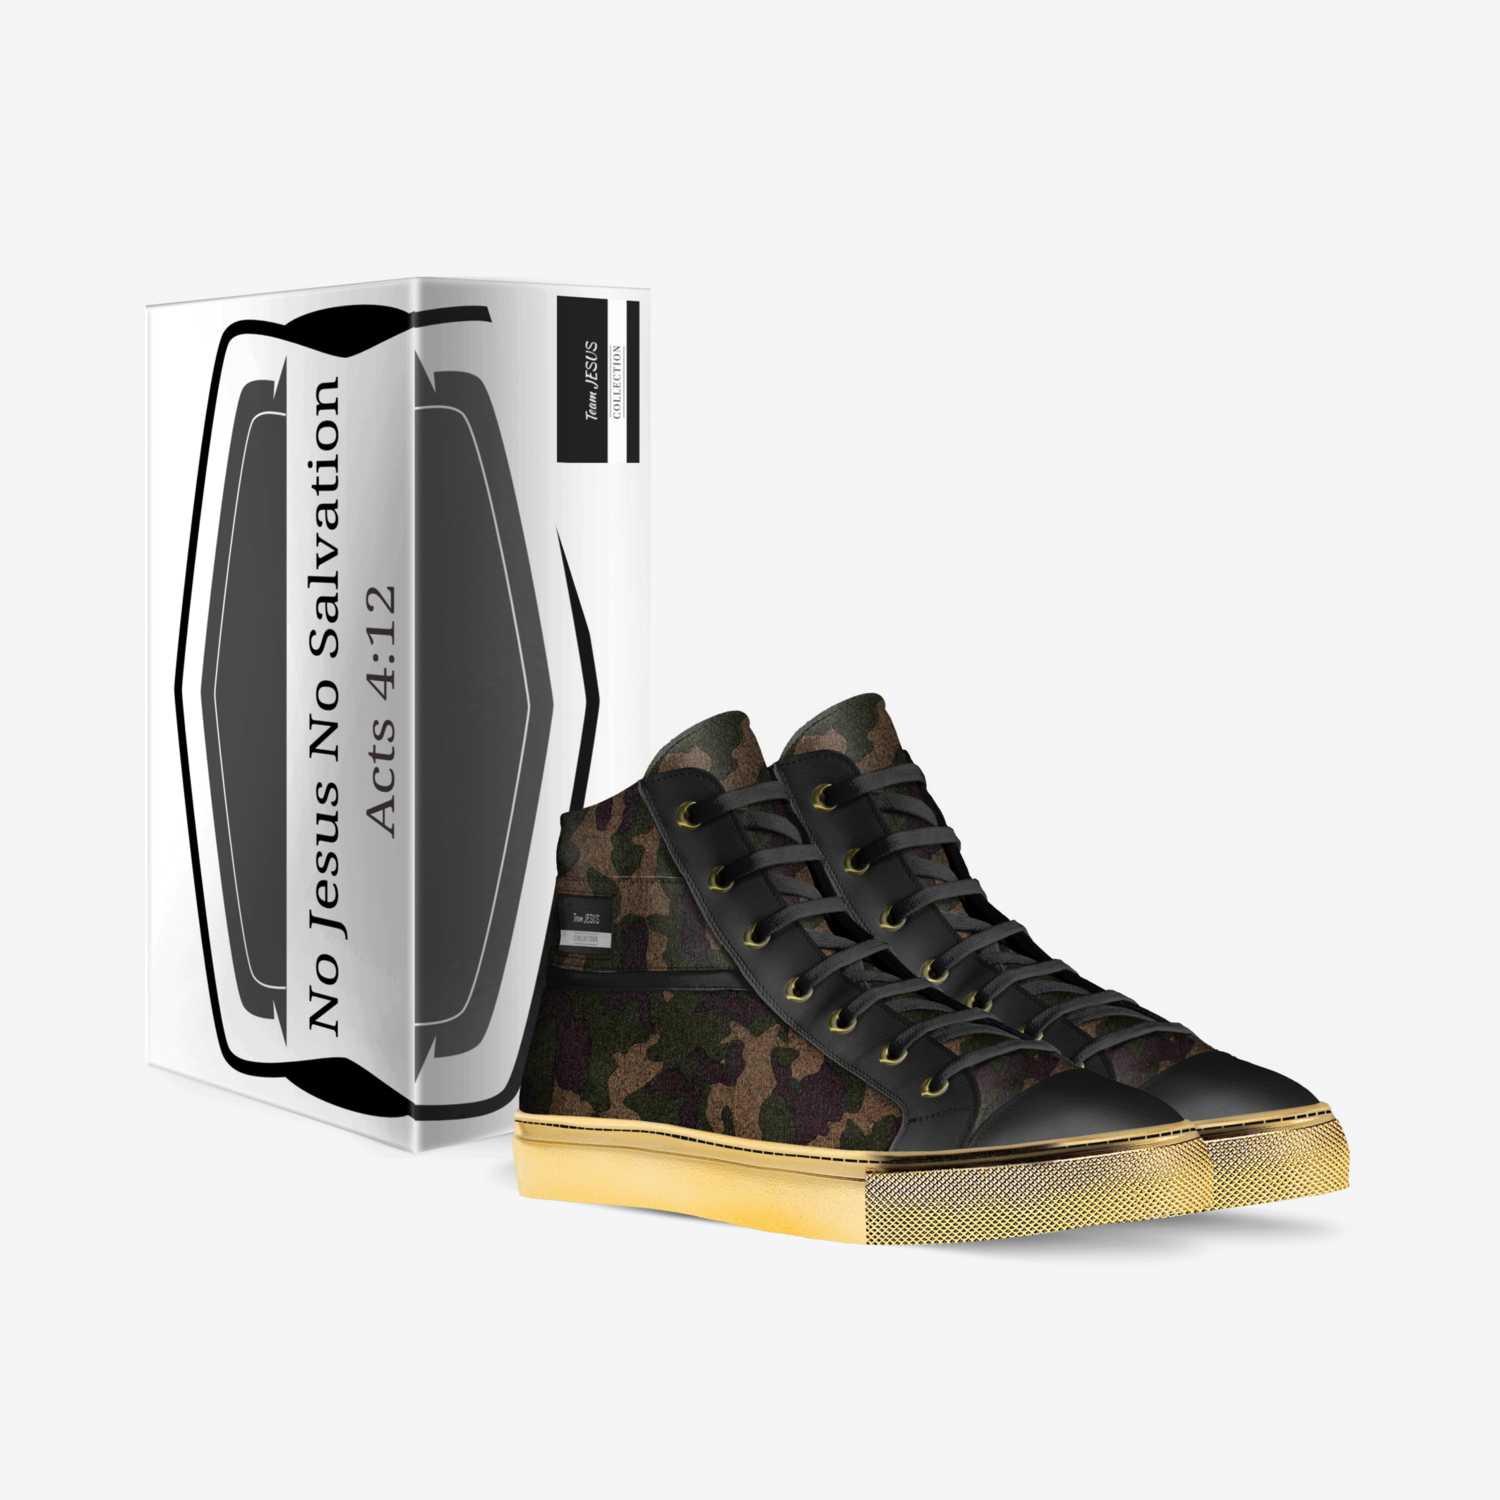 J v s Cam custom made in Italy shoes by Josh Burris | Box view